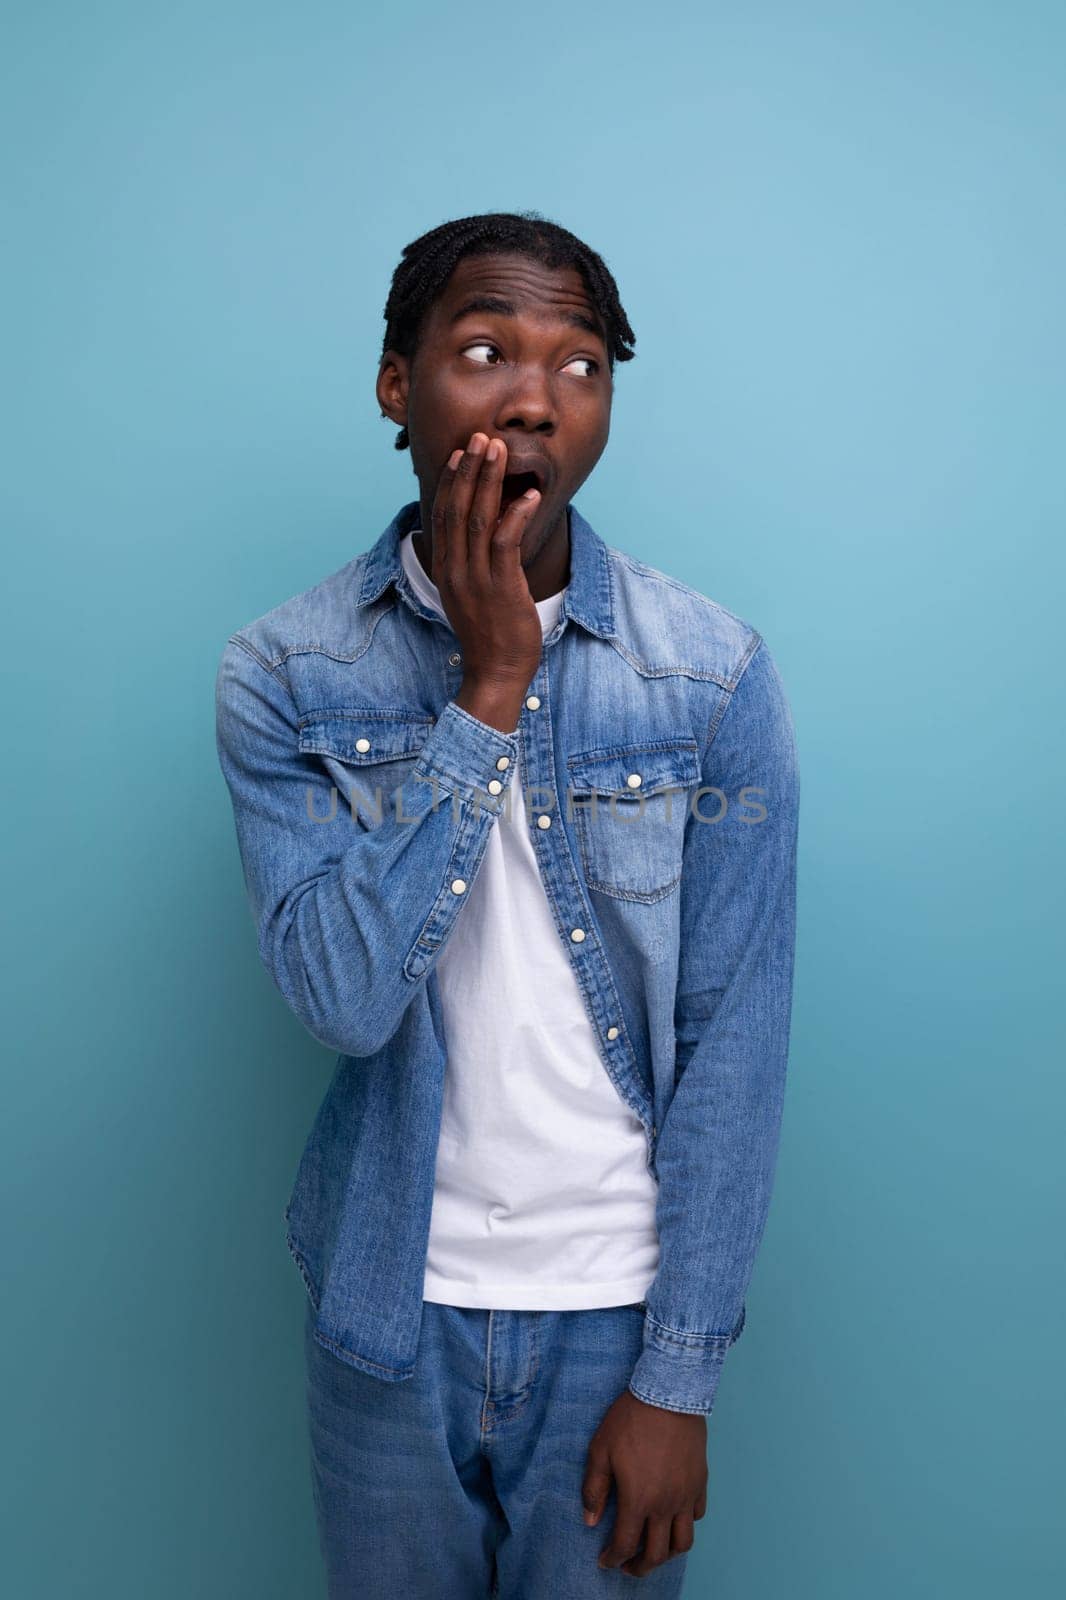 close-up portrait of a surprised young african guy with dreadlocks in a denim jacket.